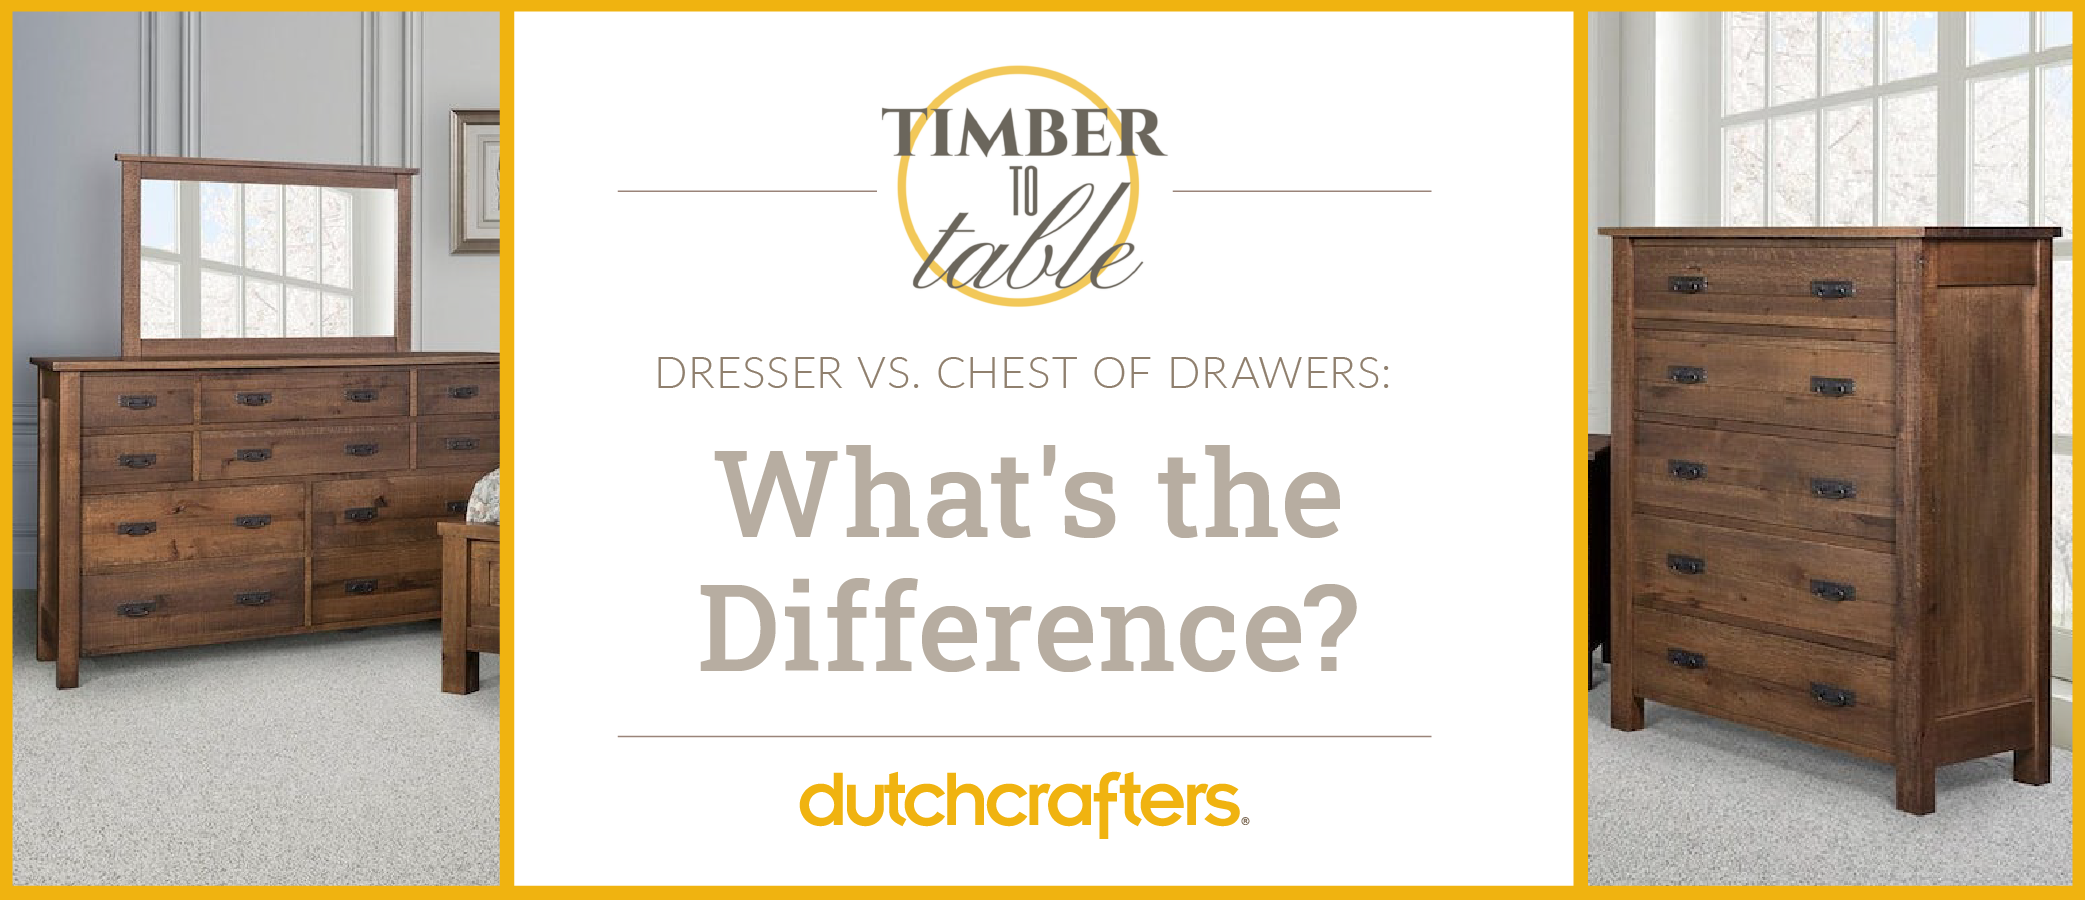 Dresser vs. Chest of Drawers What's the Difference? TIMBER TO TABLE